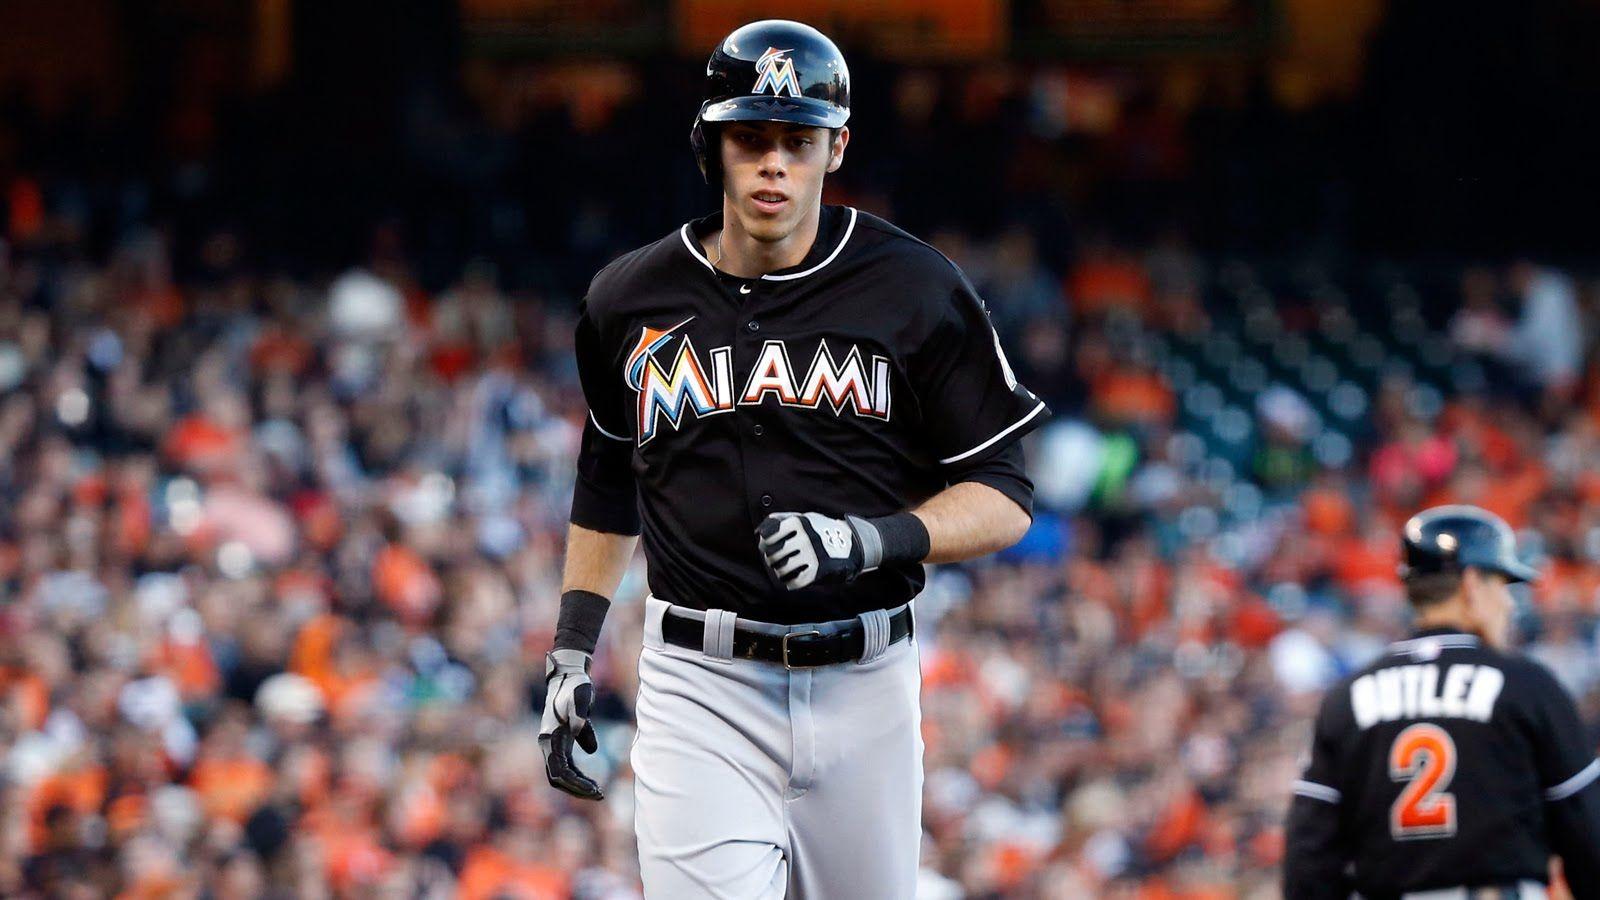 Christian Yelich Career Highlights / Miami Marlins